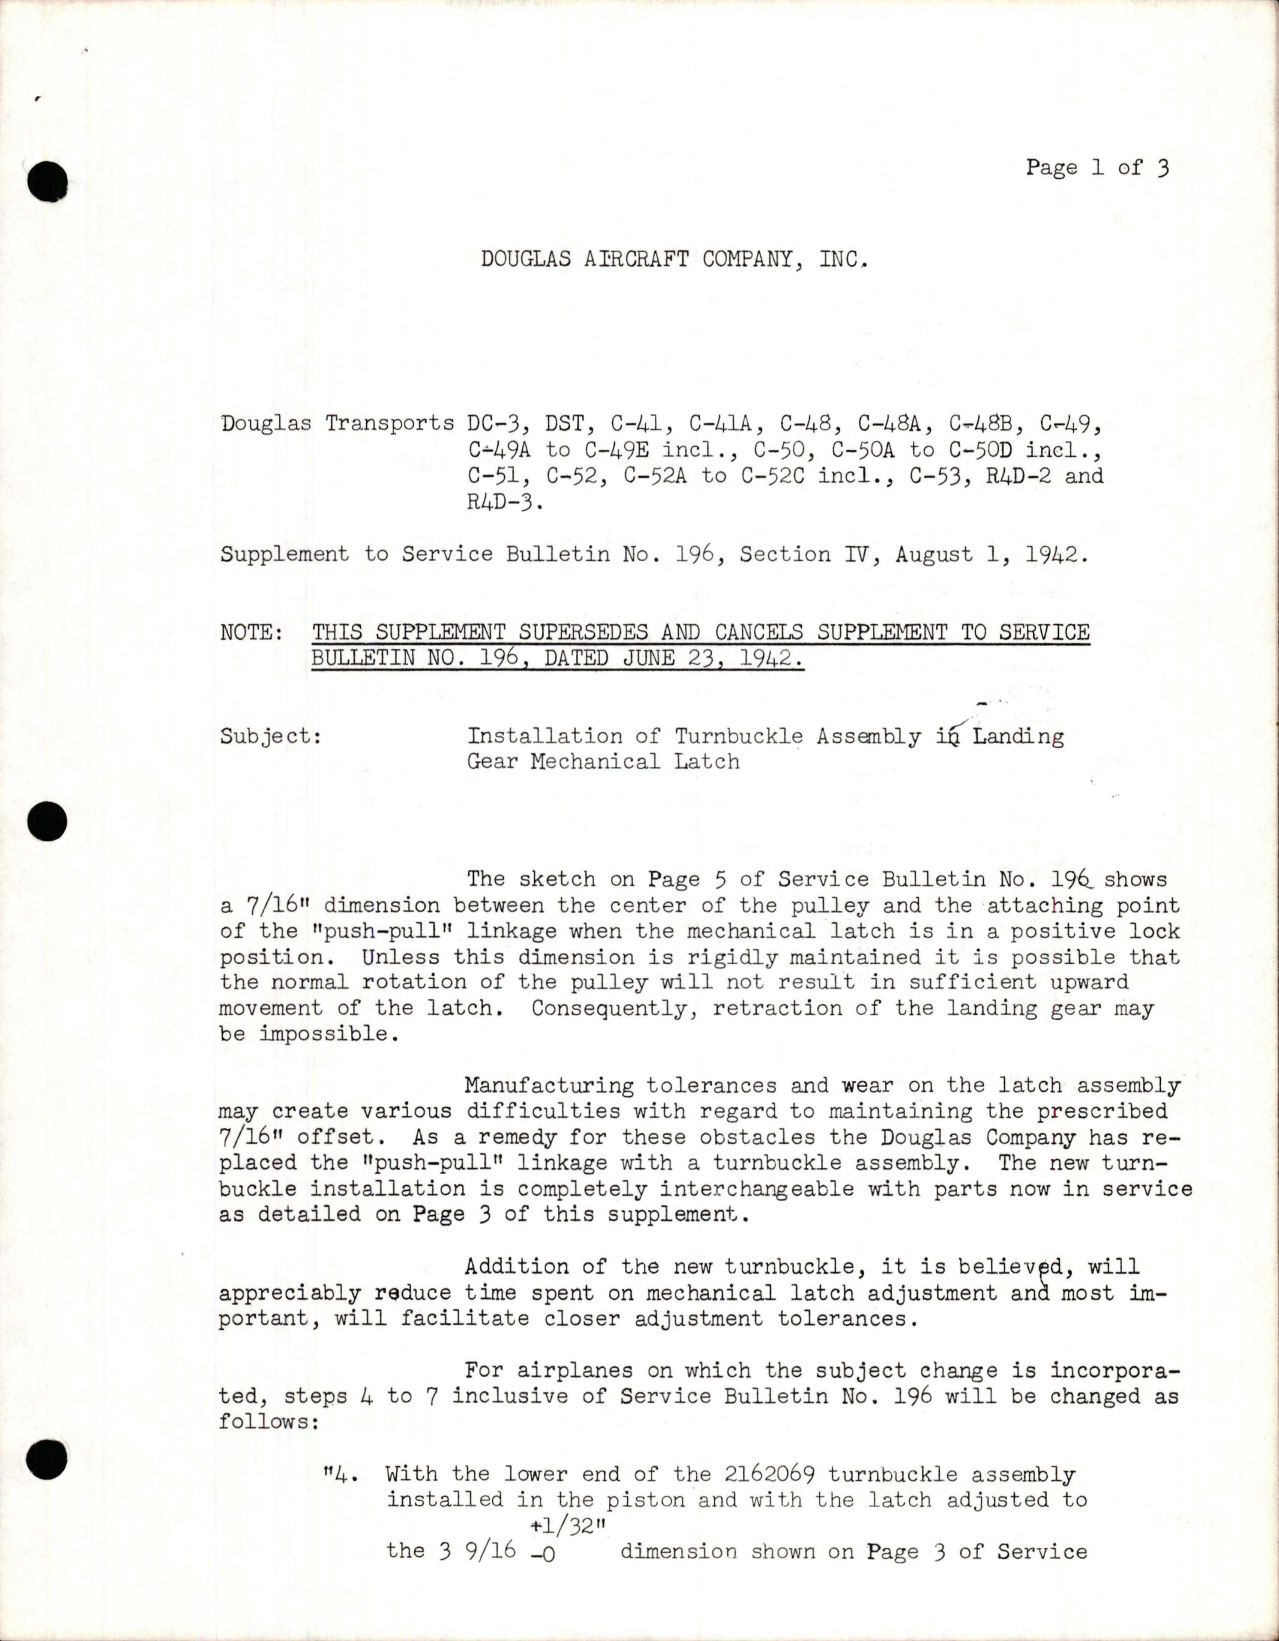 Sample page 1 from AirCorps Library document: Instruction of Turnbuckle Assembly in Landing Gear Mechanical Latch